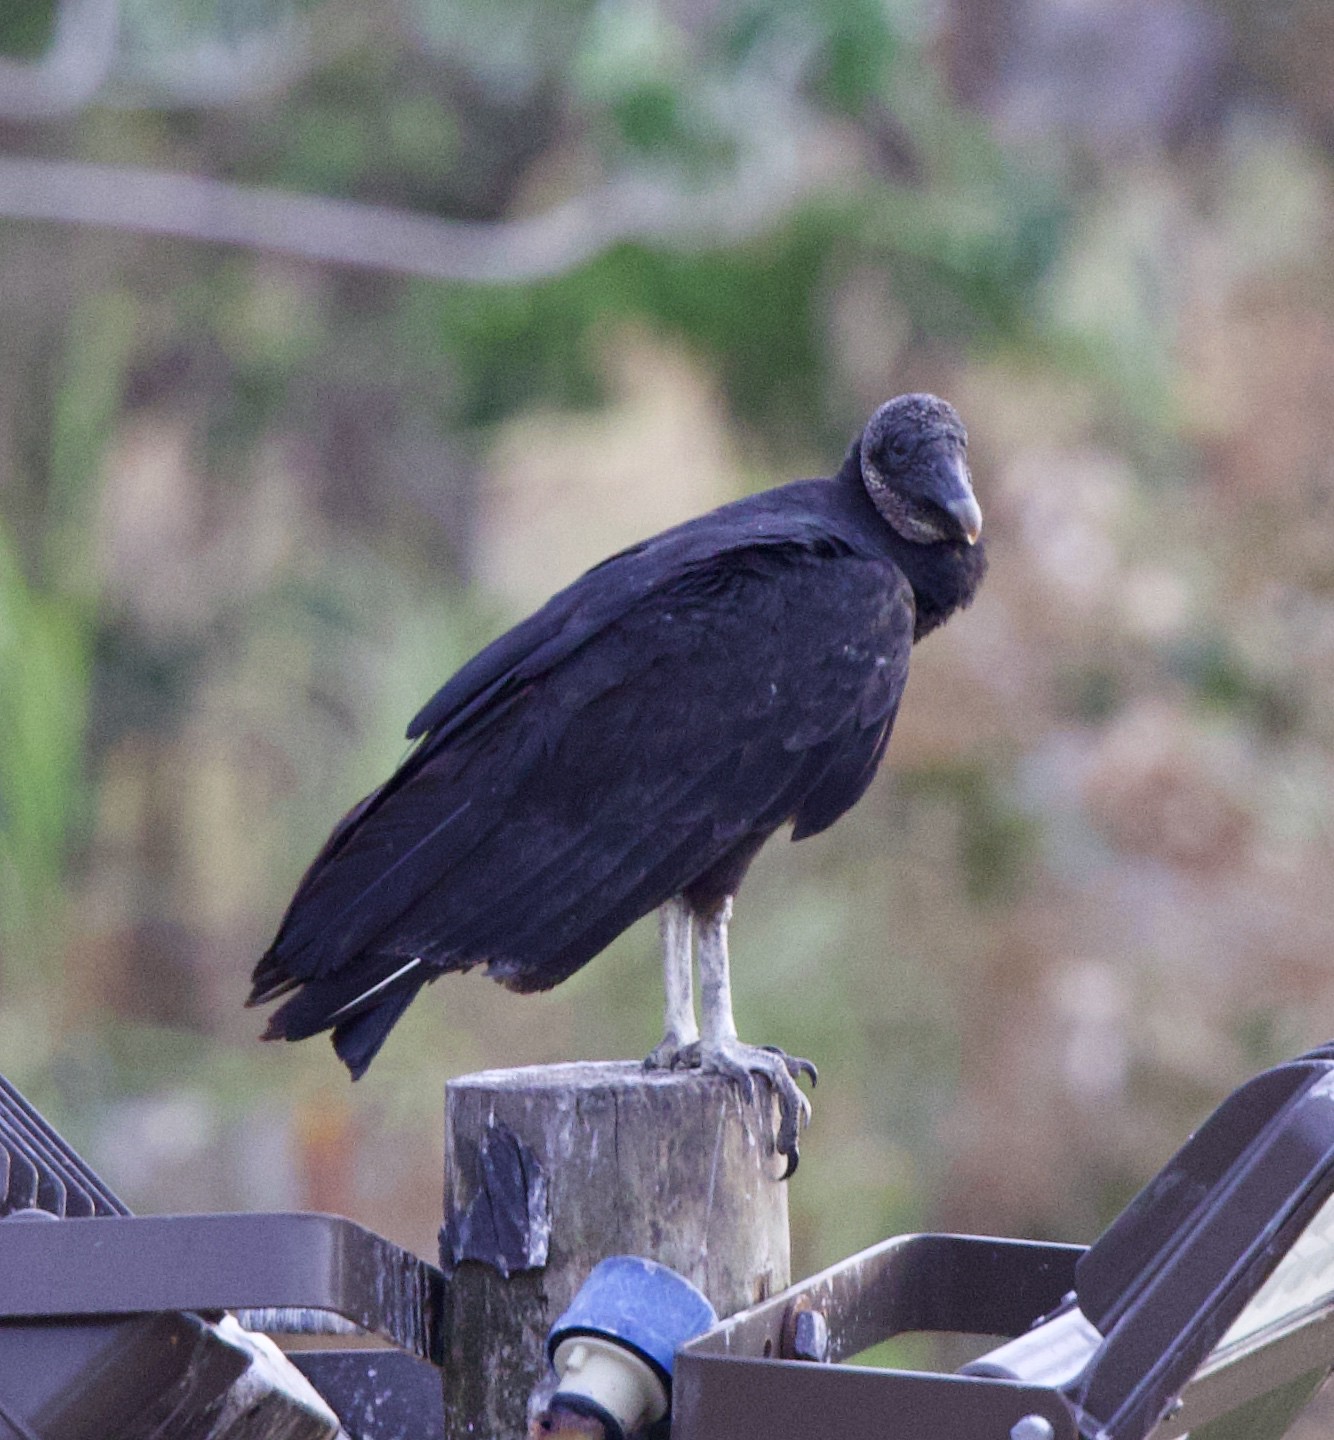 A Black Vulture perched on a pole